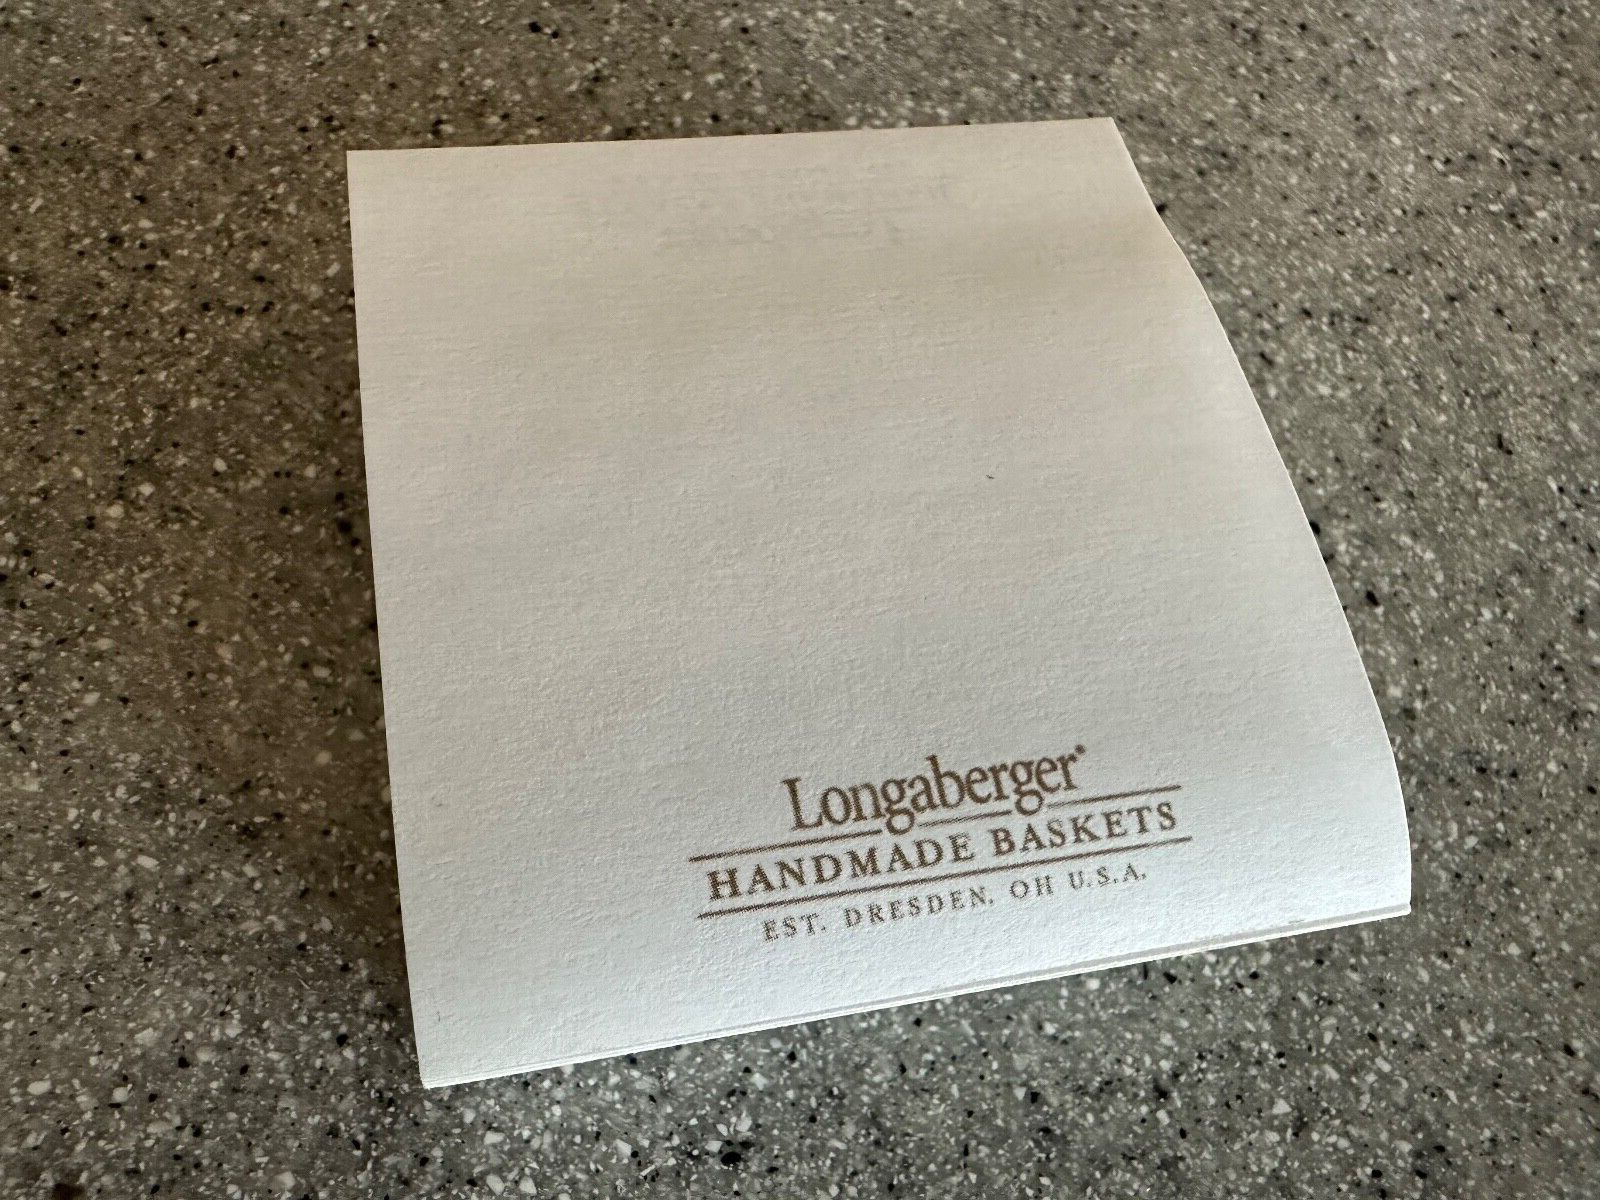 LONGABERGER Pop~up Post-It pad, sheets are about 2 3/4” x 3”, 200+ sheets